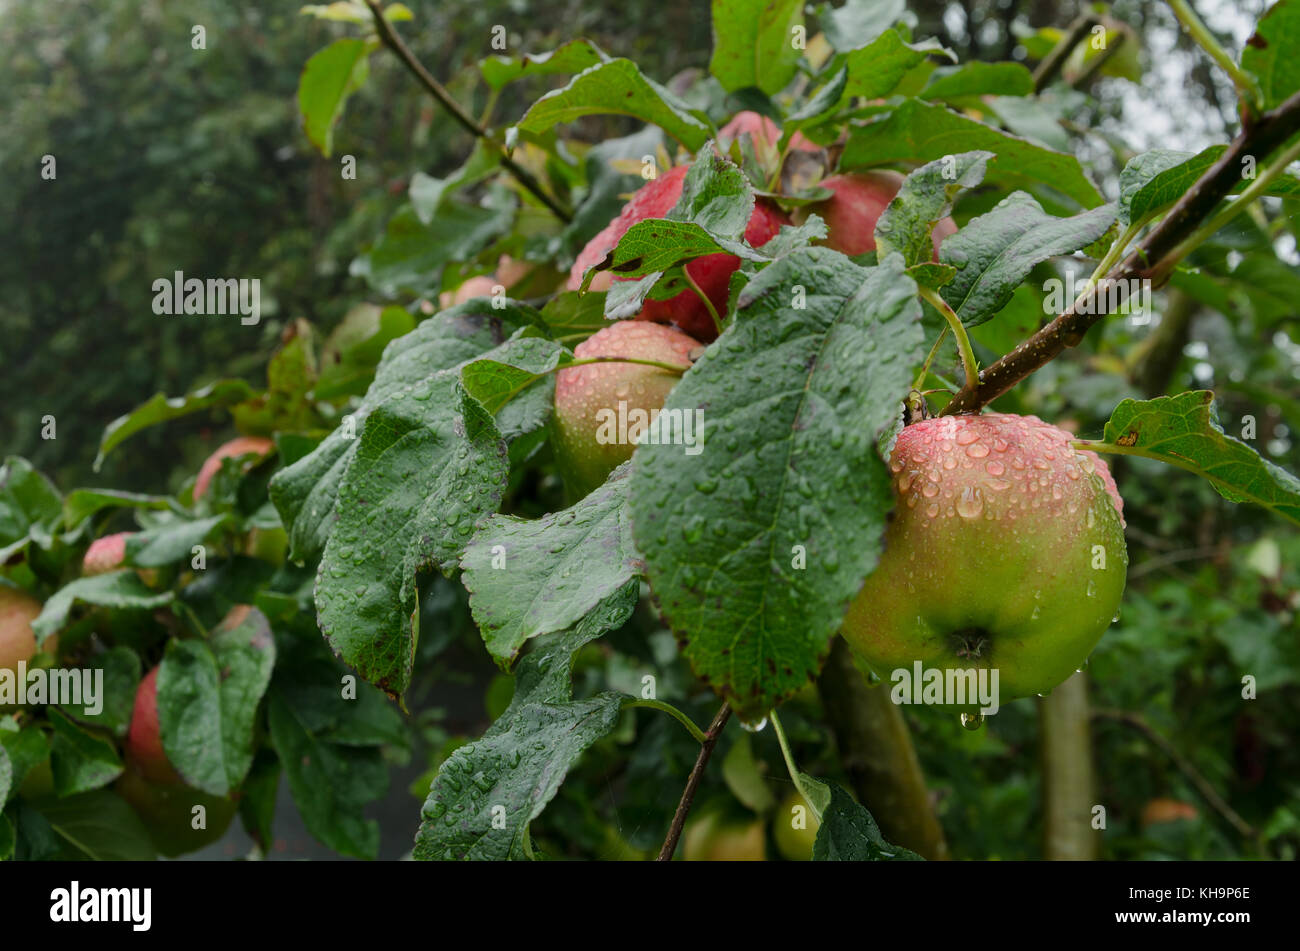 Delicious red ripe eating apple peeping out behind leaves after a sudden summer rainstorm being coated in raindrops Stock Photo